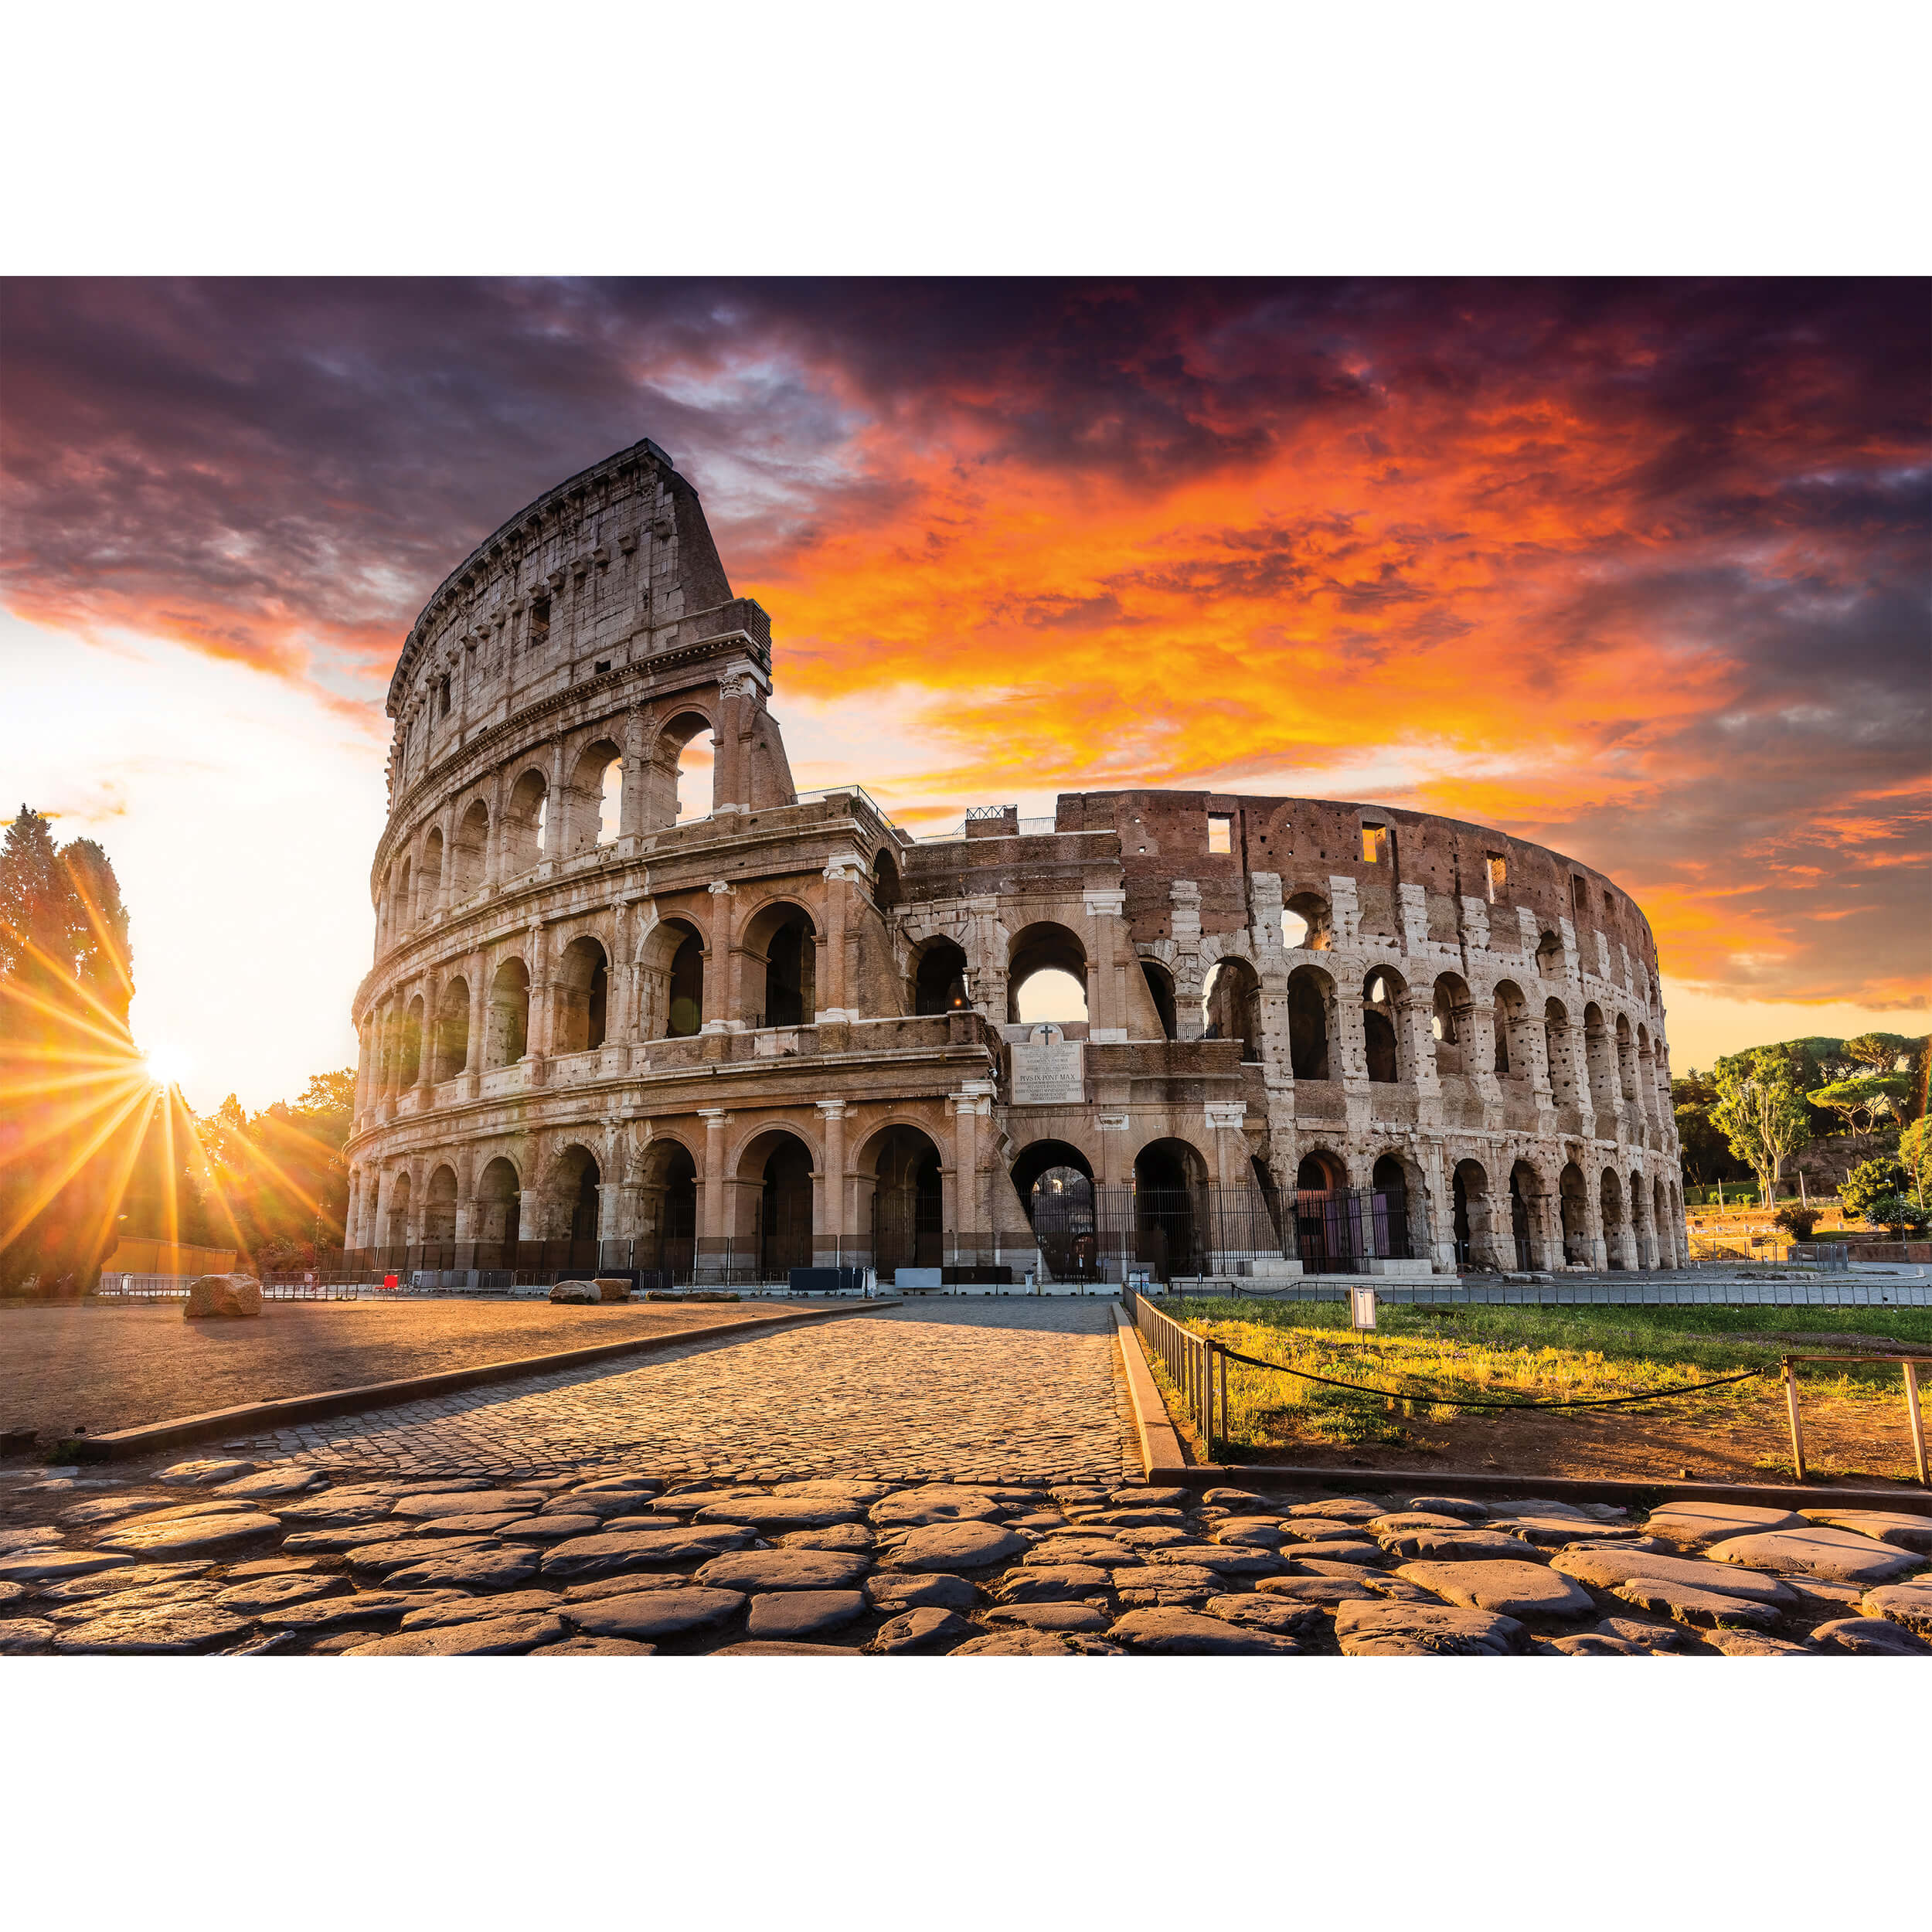 Morning at the Colosseum - 1000 Piece Jigsaw Puzzle - Rome, Italy